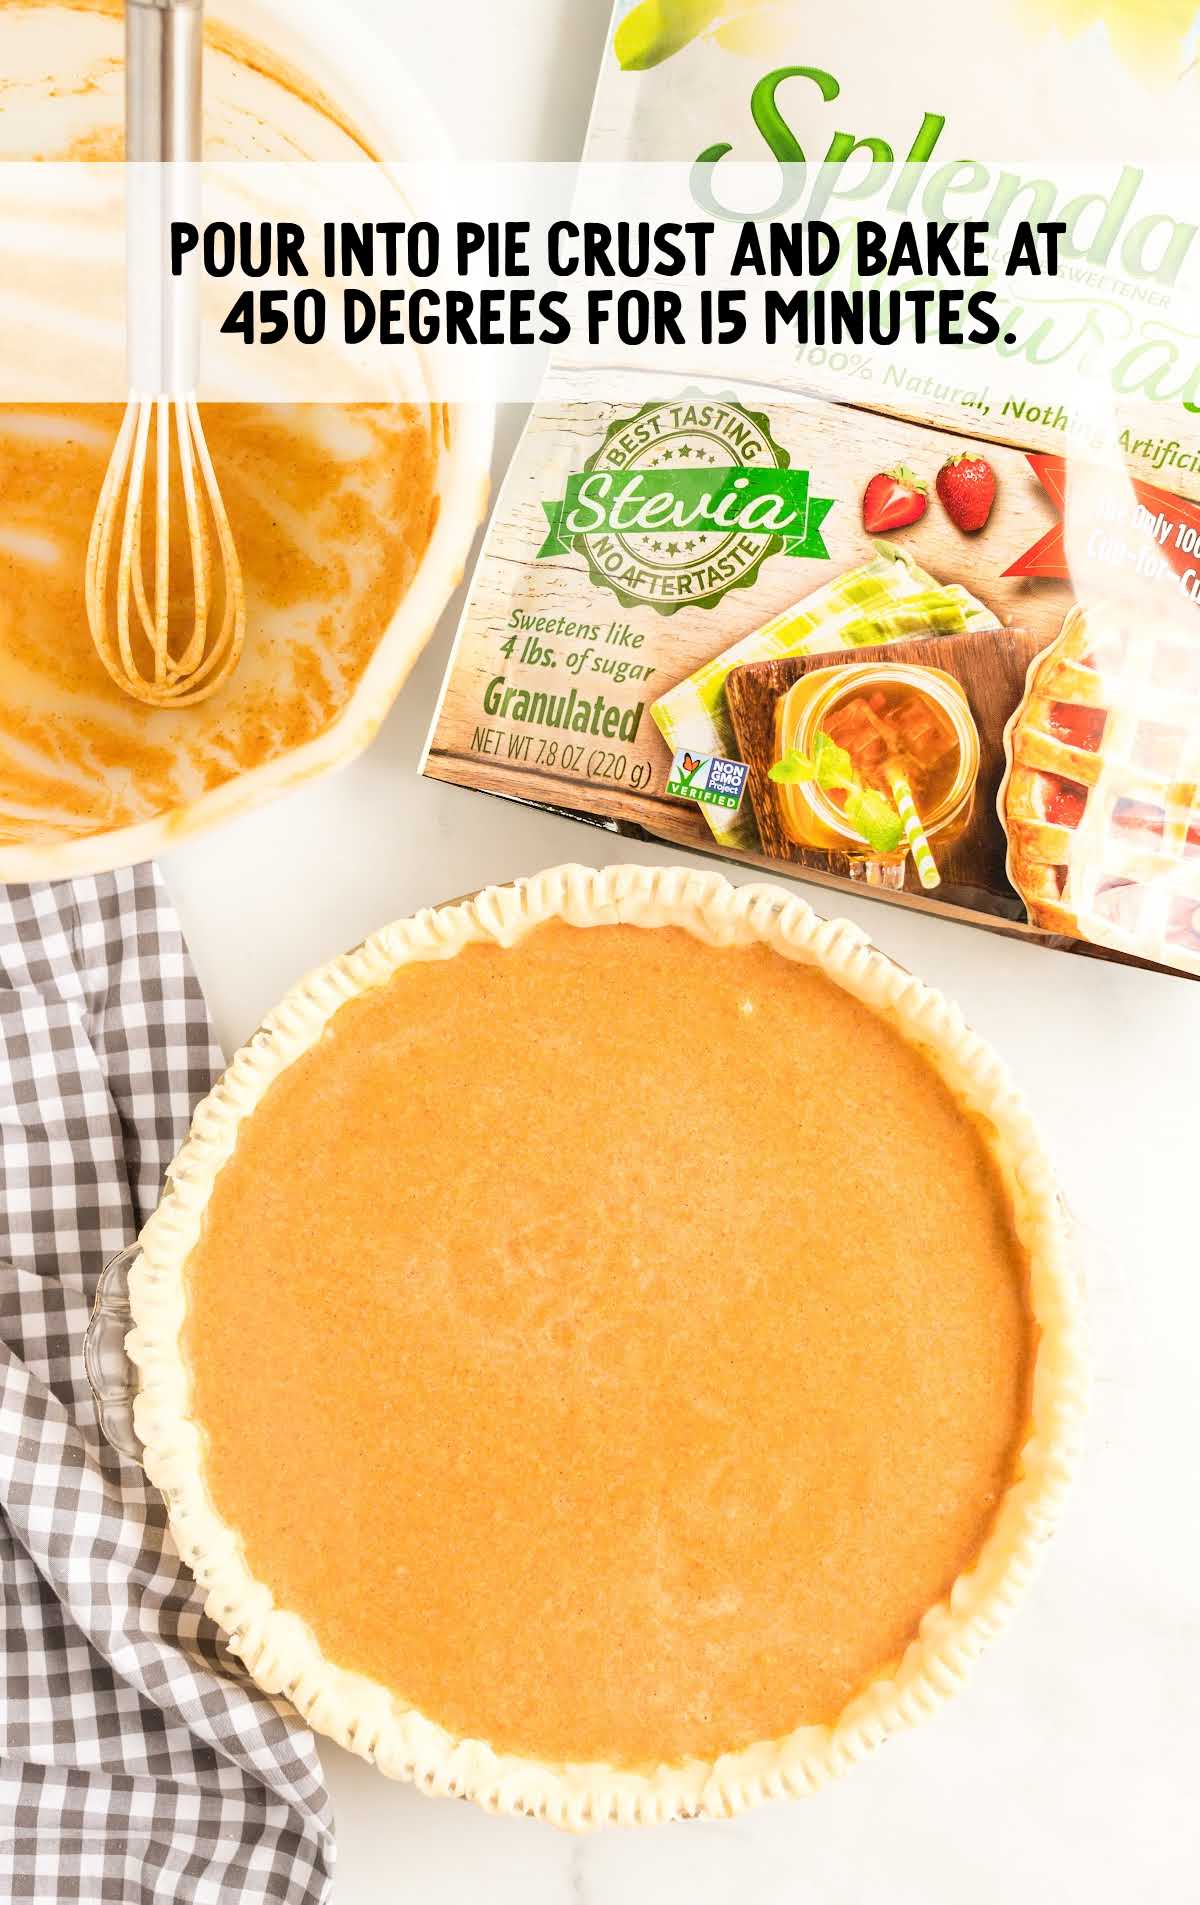 pour milk mixture into the pie crust and bake